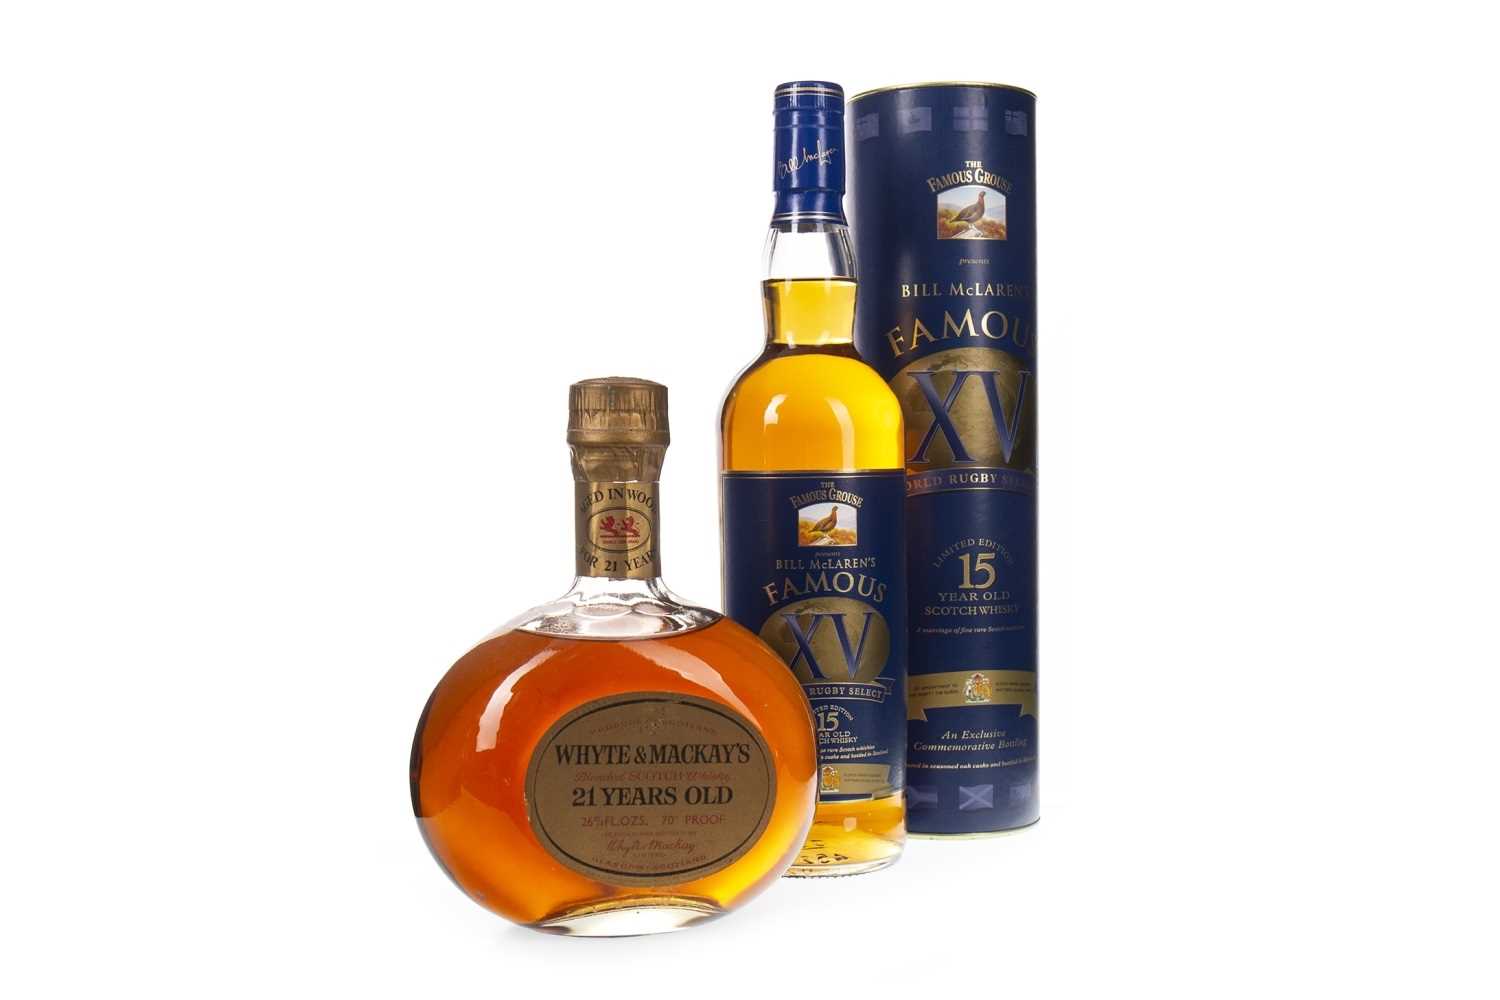 Lot 407 - FAMOUS GROUSE 15 YEARS OLD AND WHYTE & MACKAY 21 YEARS OLD